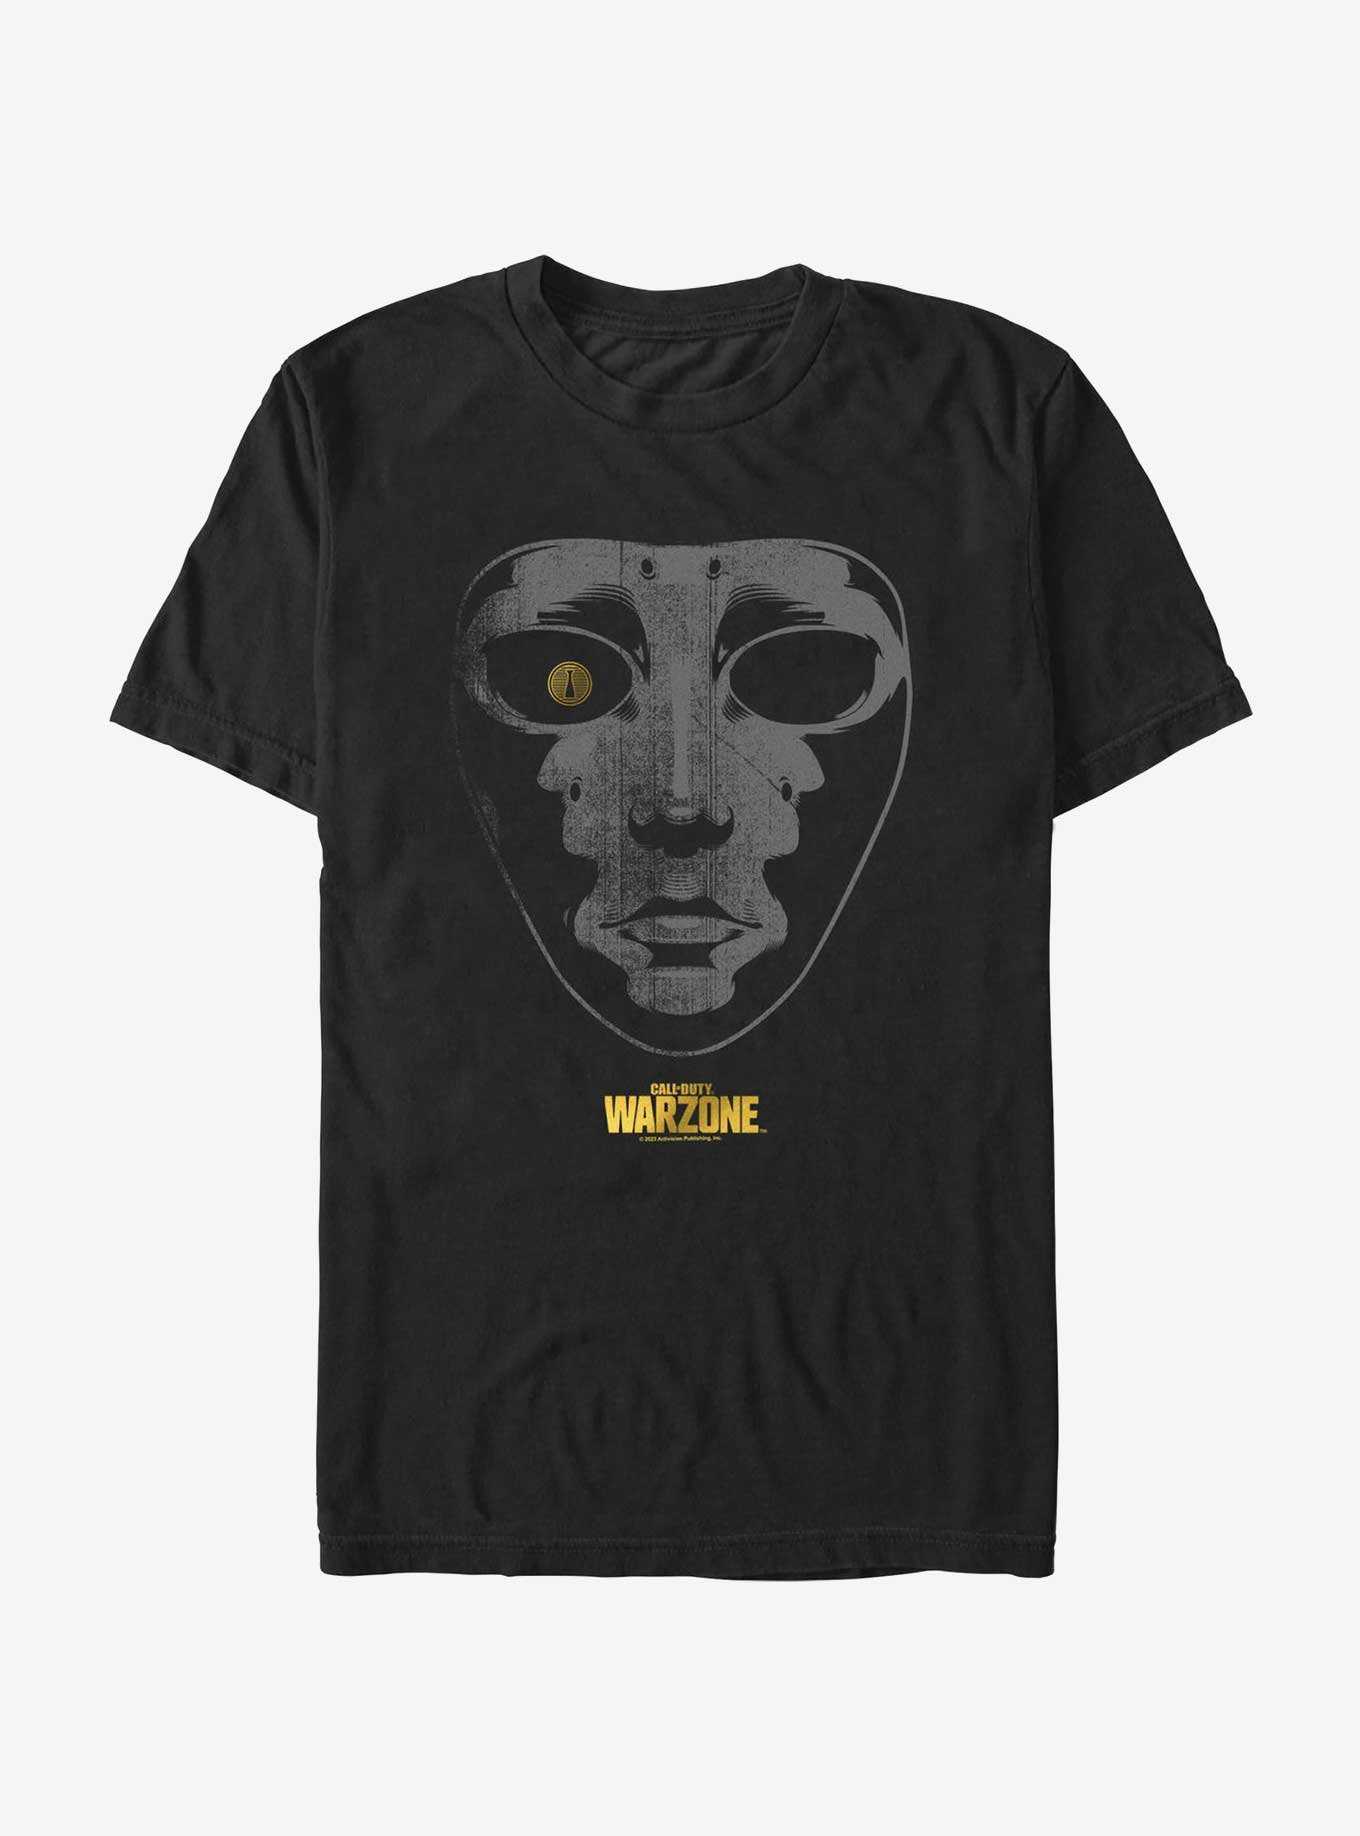 Call of Duty: Warzone Roze Mask T-Shirt, , hi-res